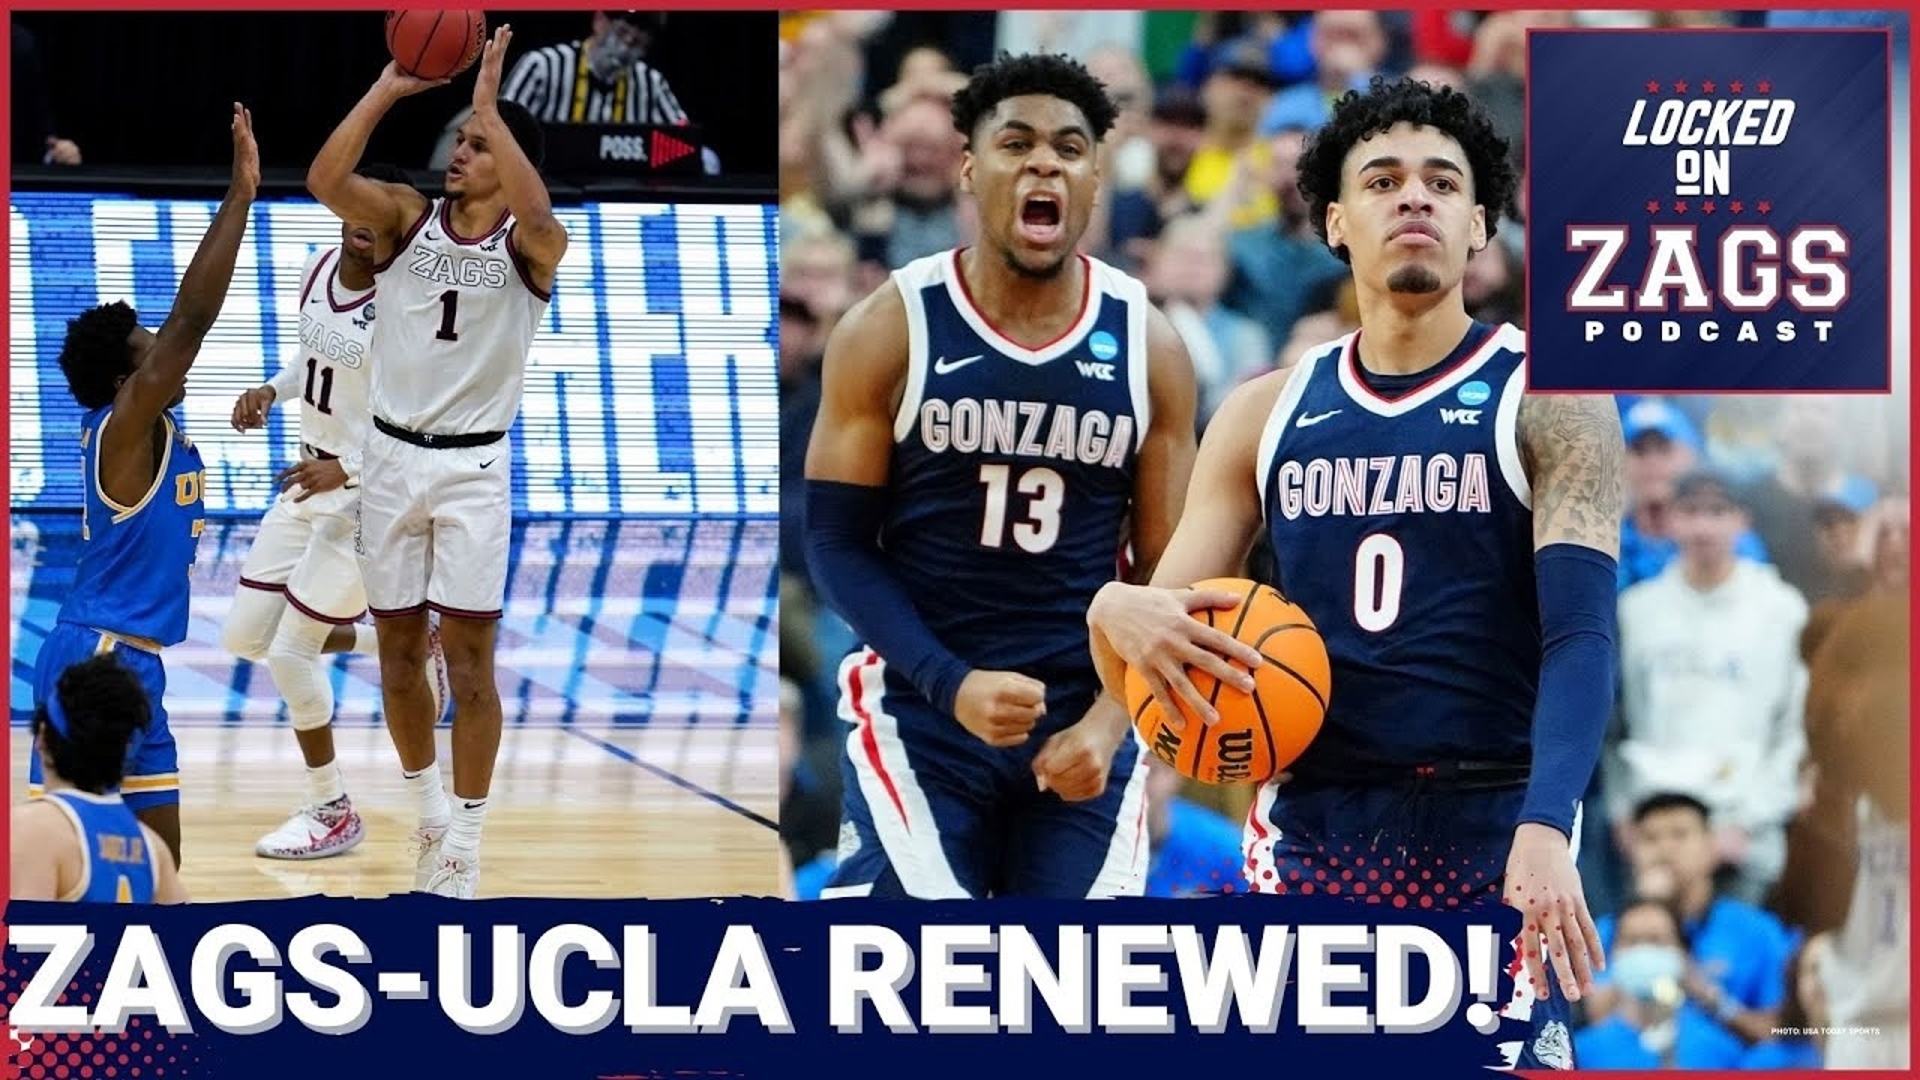 Mark Few and the Gonzaga Bulldogs agreed to a two-year non-conference scheduling agreement with Mick Cronin and the UCLA Bruins.